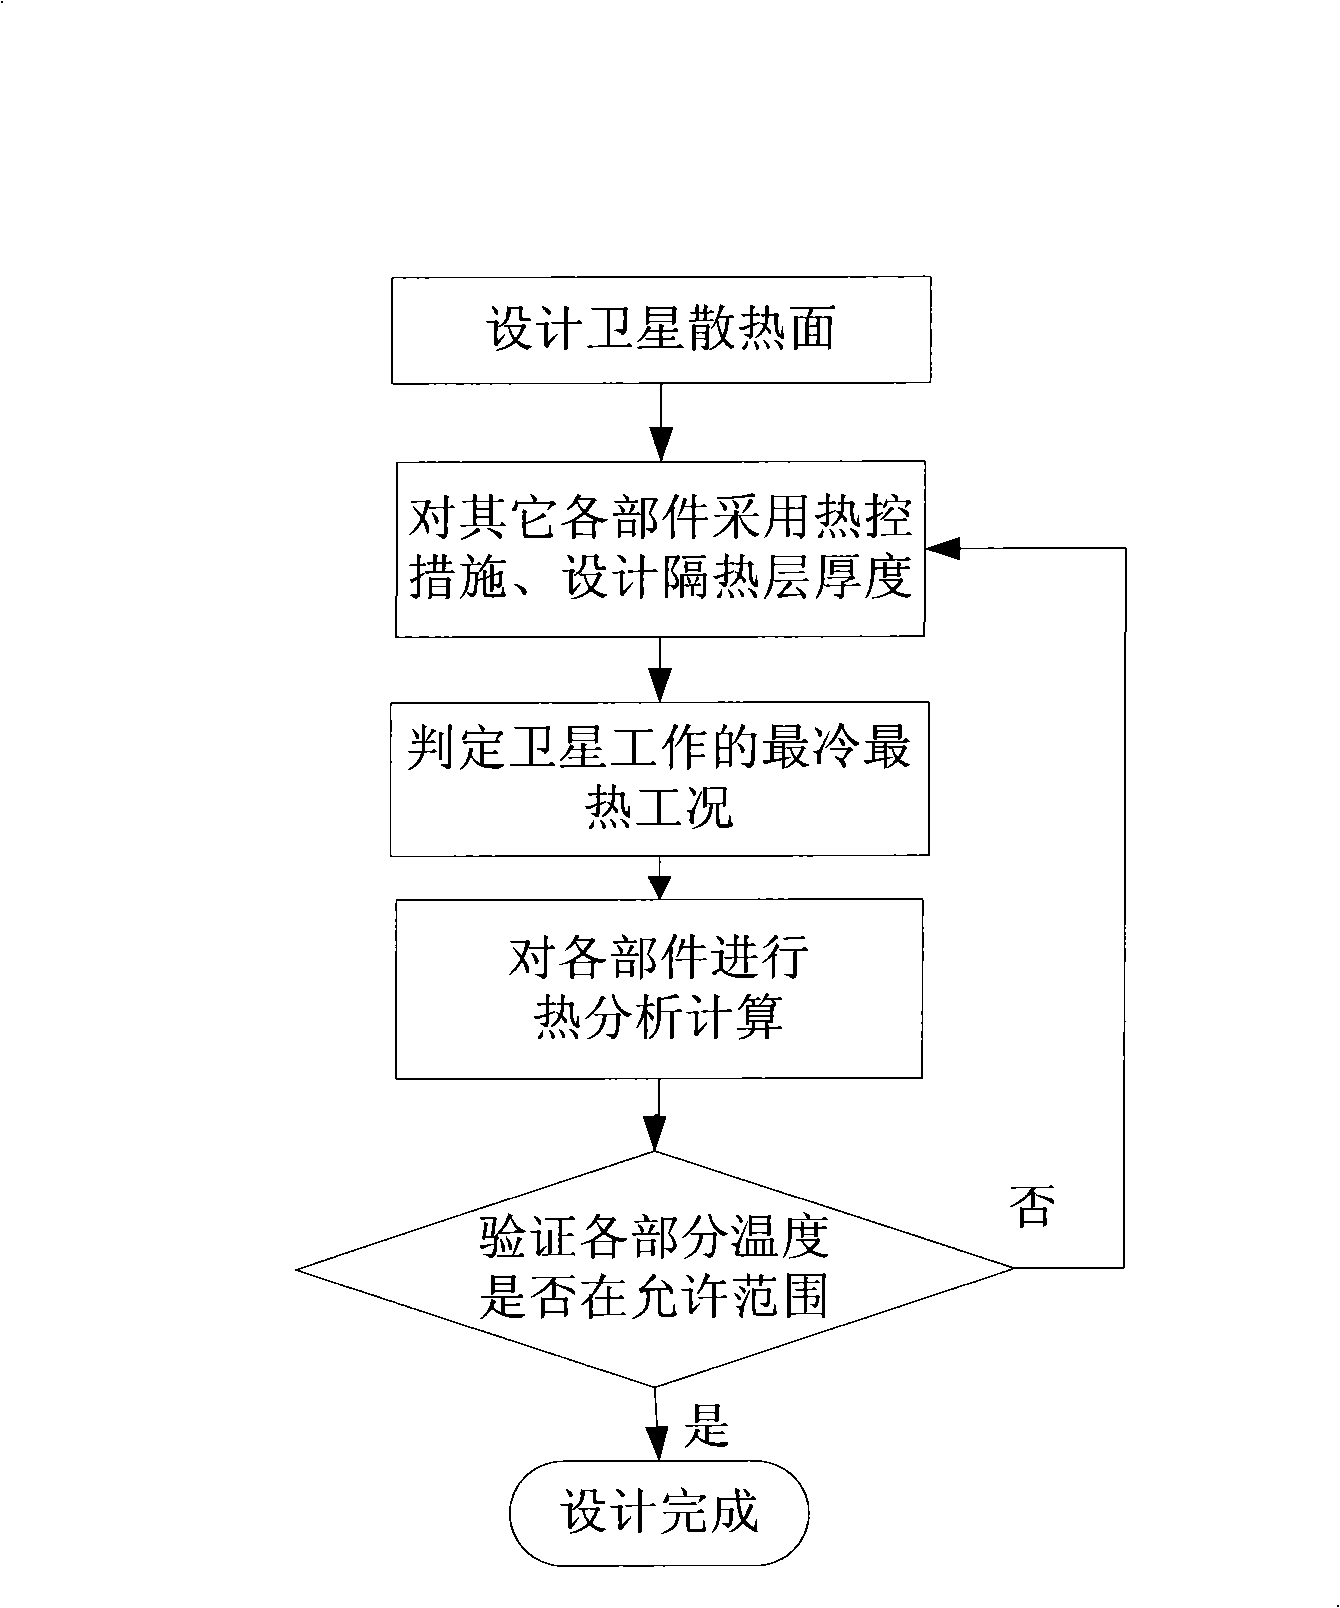 Method for determining united optimization design parameter of satellite thermal insulating layer and radiating surface system